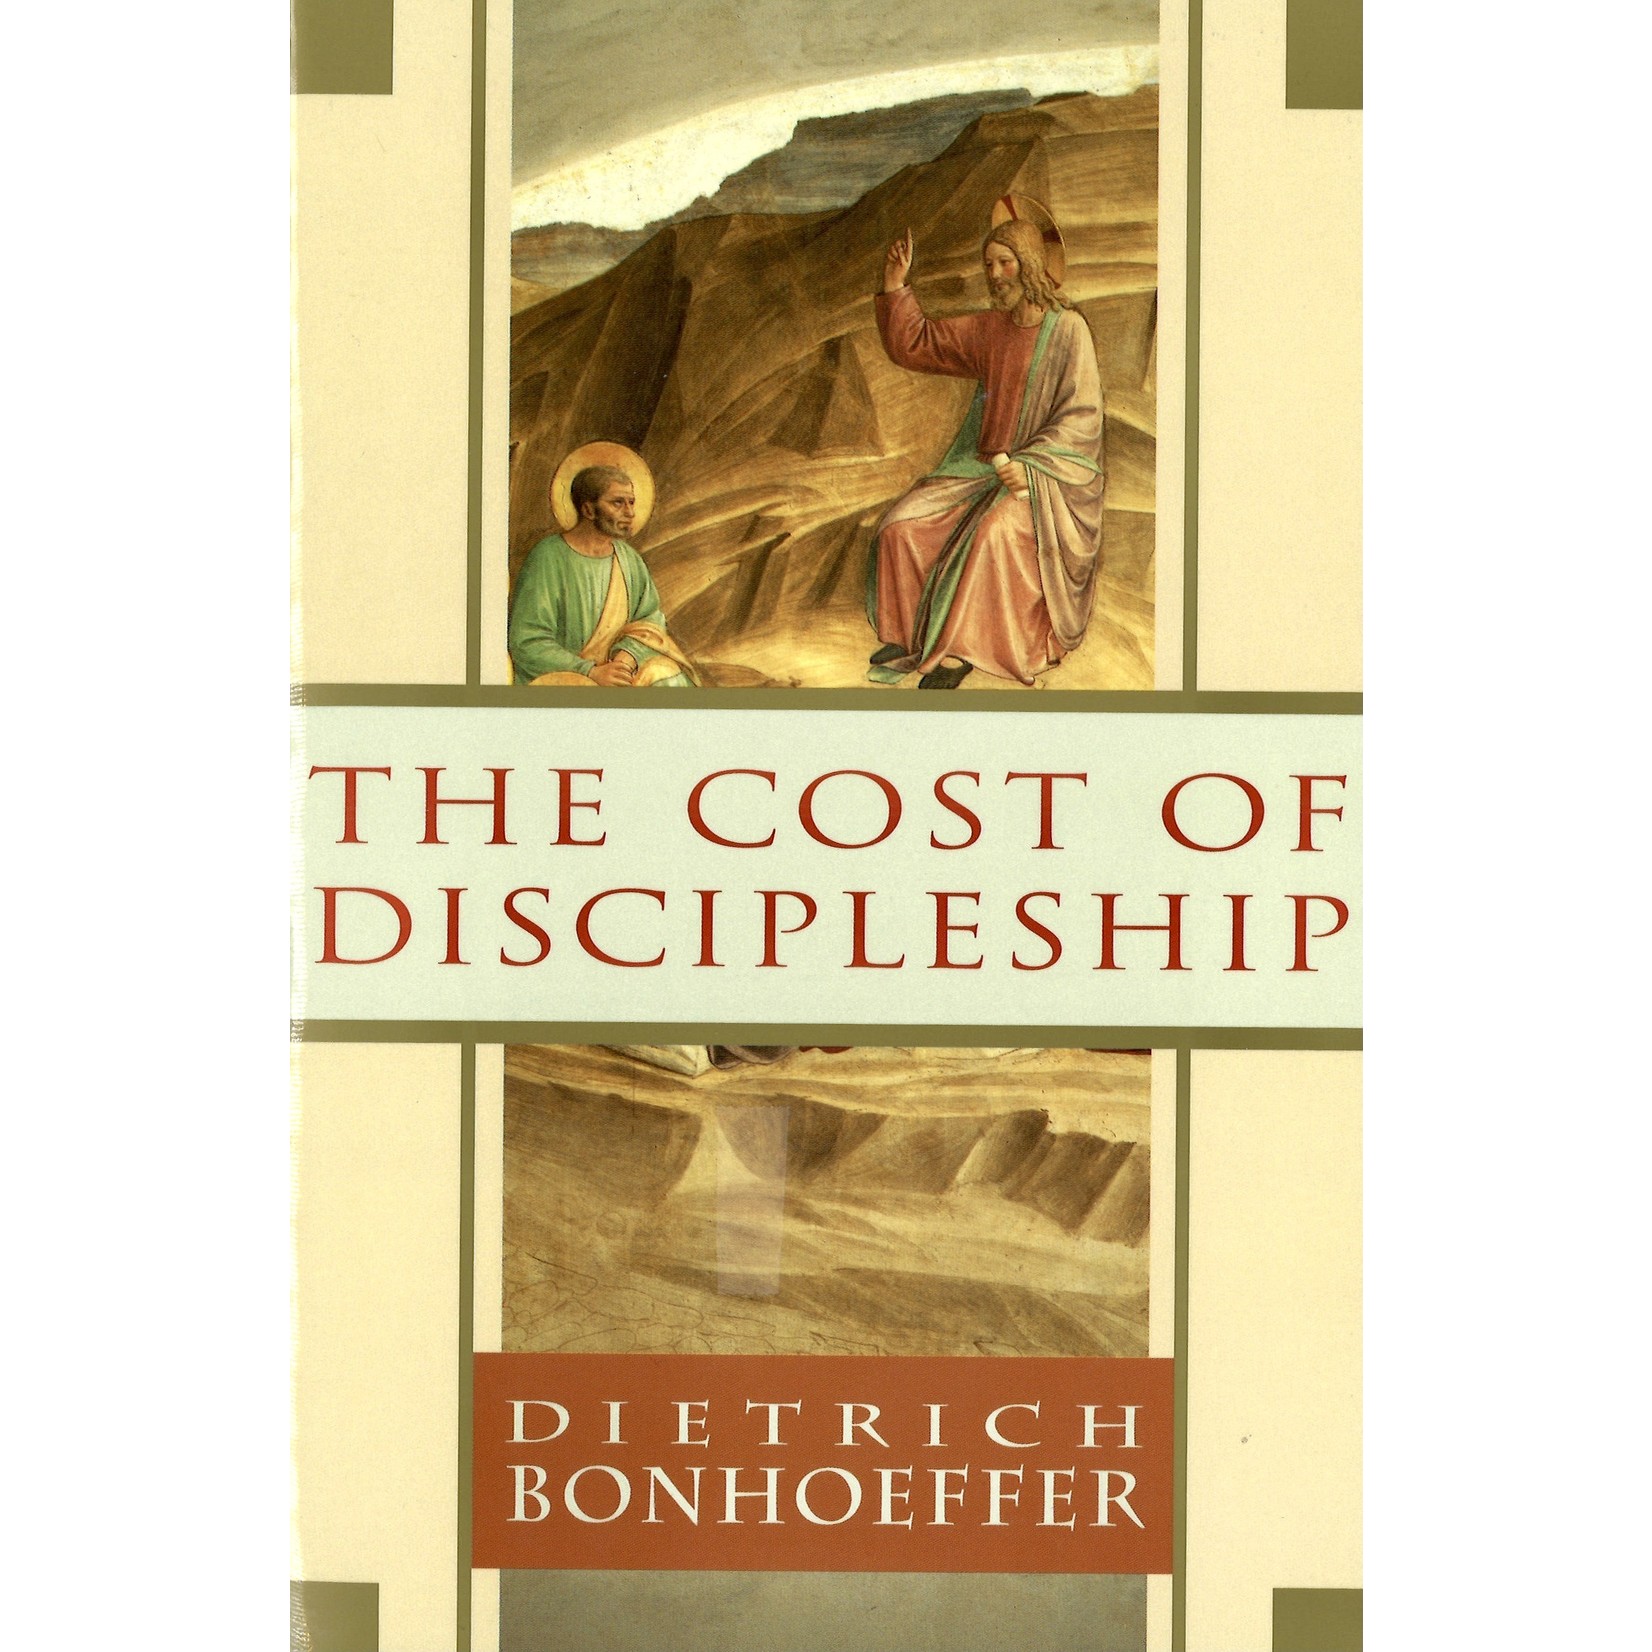 COST OF DISCIPLESHIP